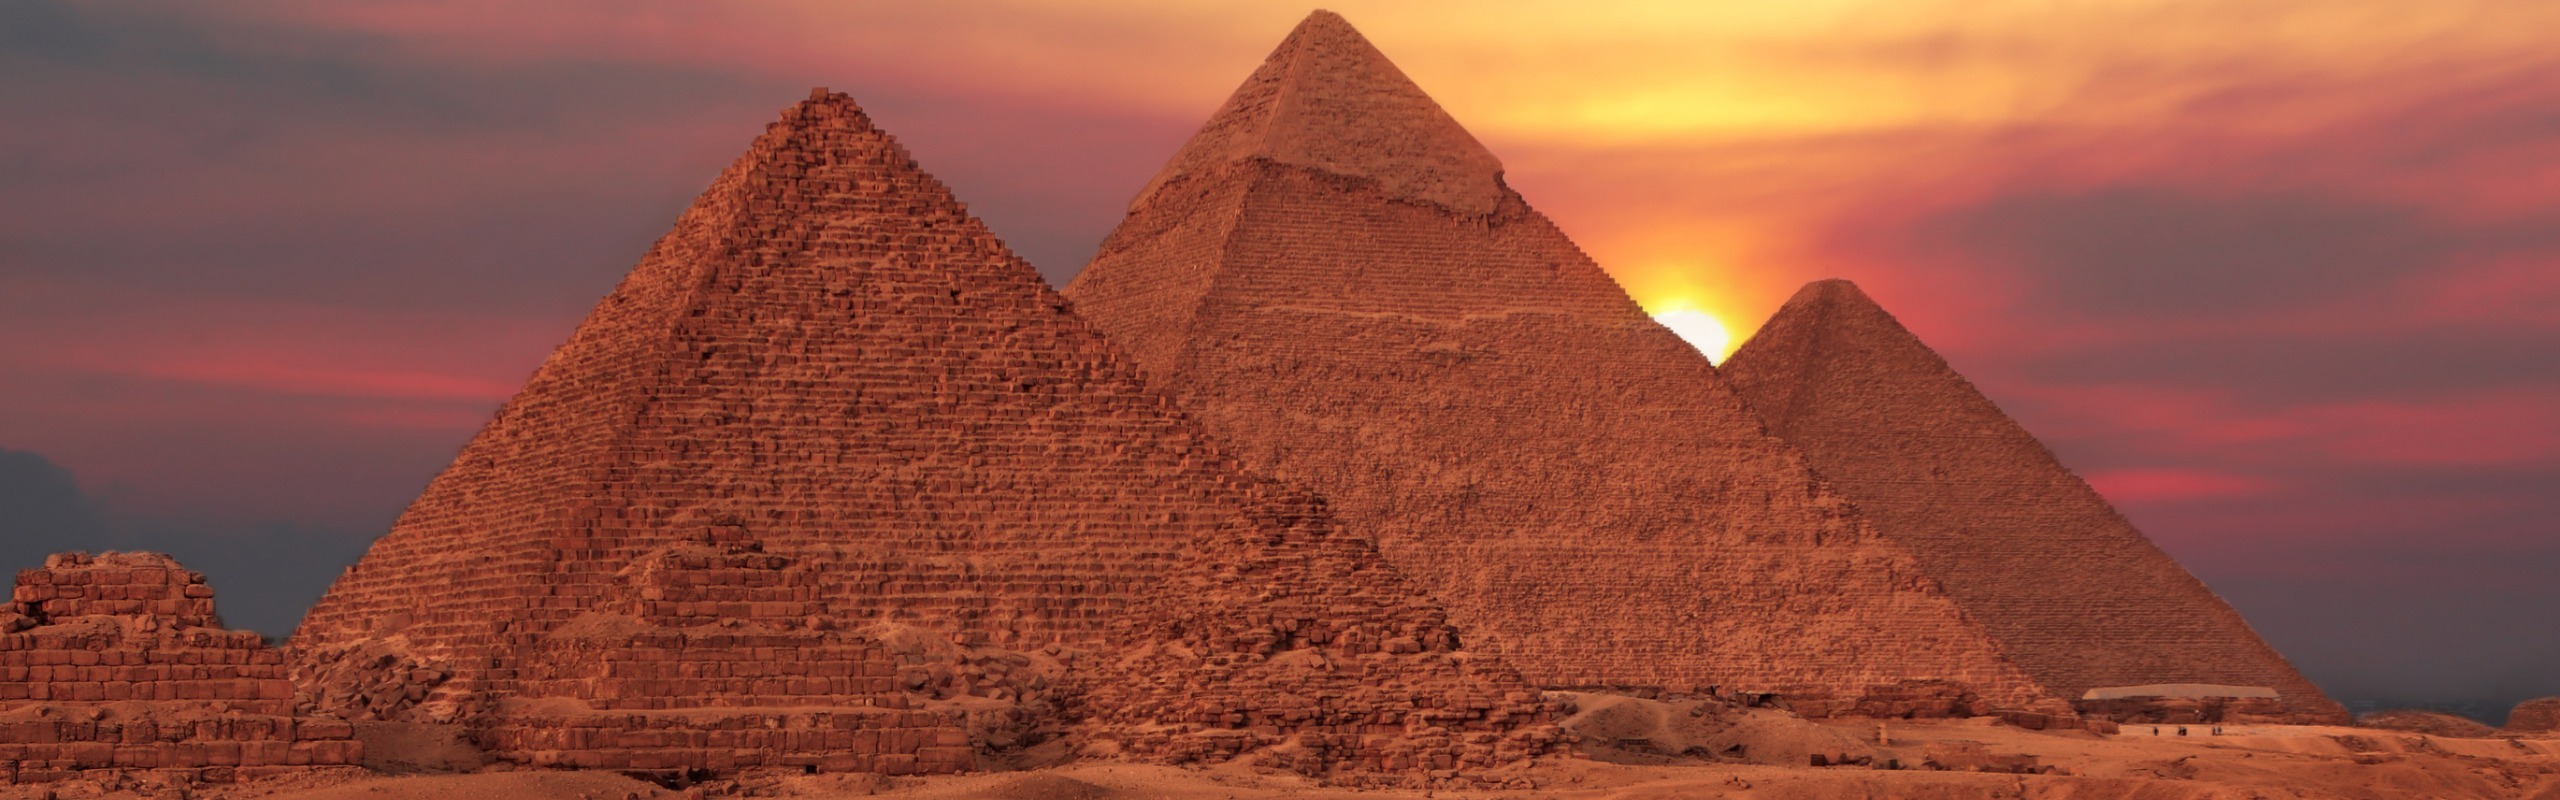 Where Are the Egyptian Pyramids?